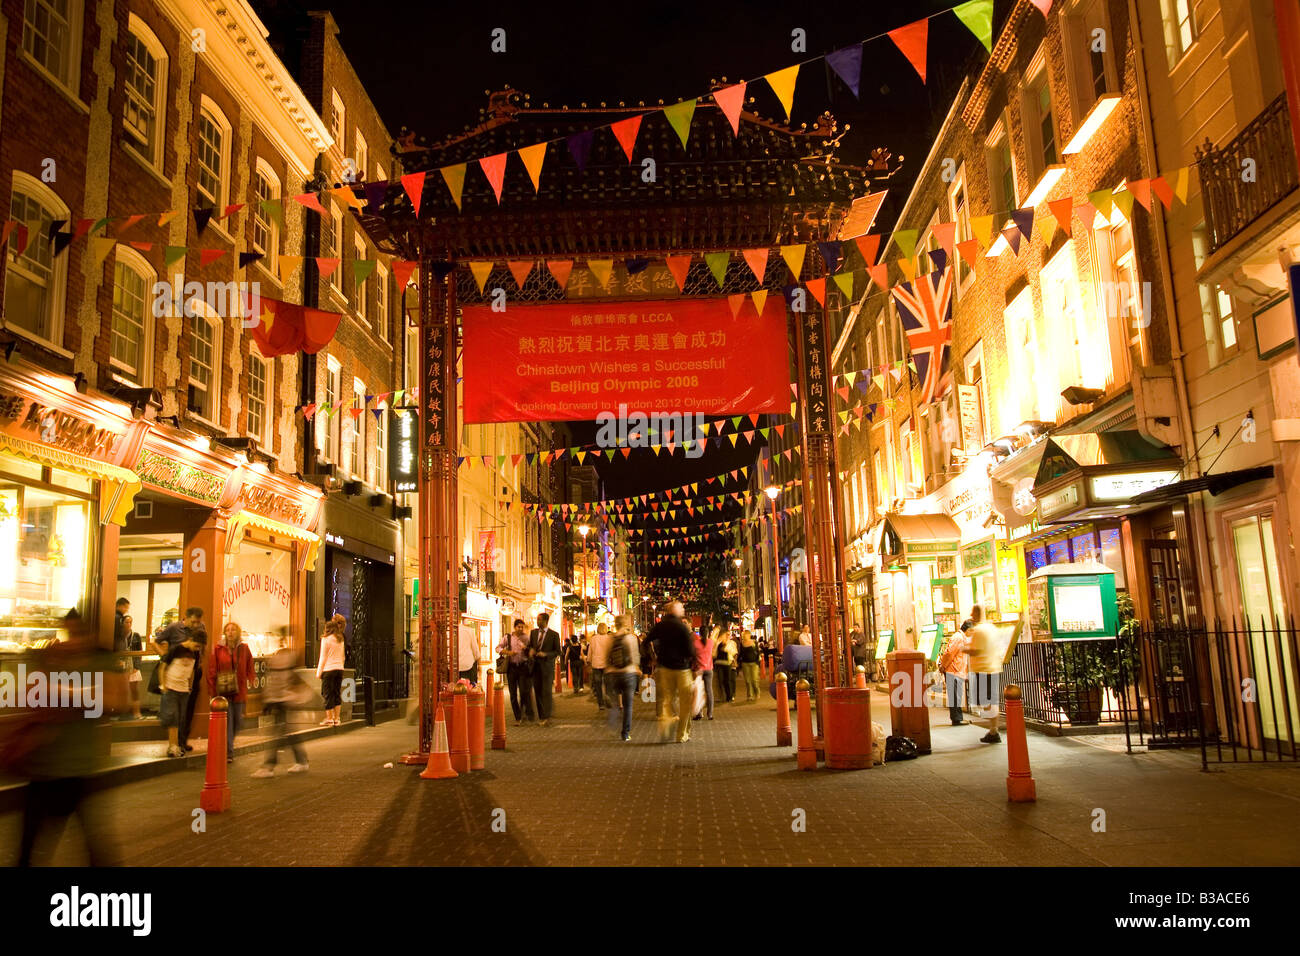 A sign from the Chinese community in Chinatown, London, expresses wishes for a successful Beijing Olympics in 2008. Stock Photo